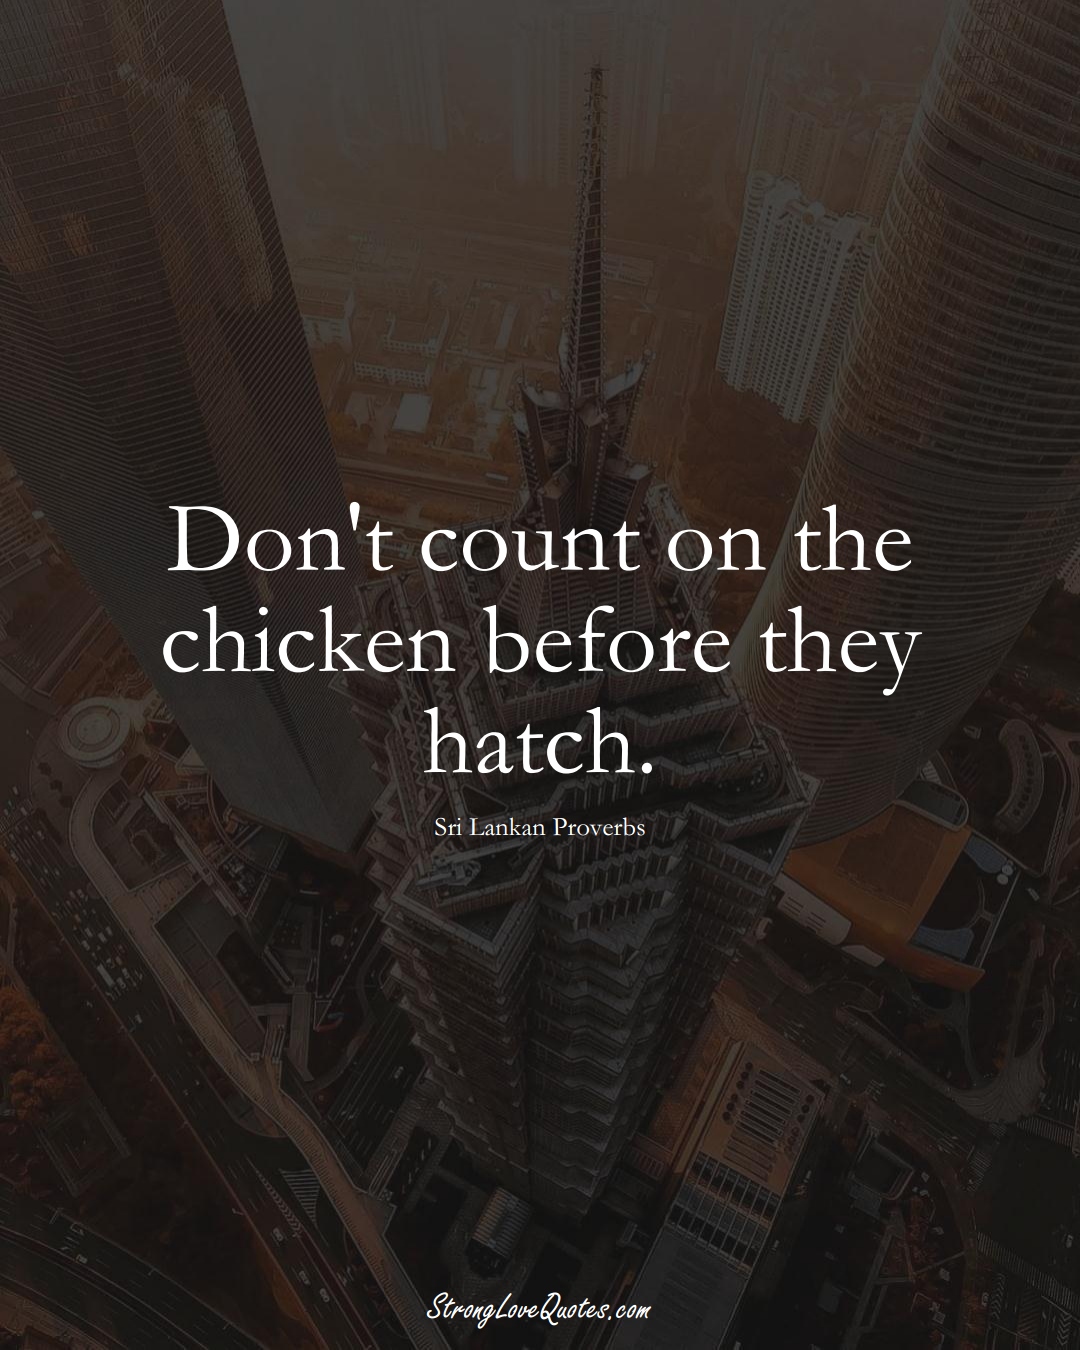 Don't count on the chicken before they hatch. (Sri Lankan Sayings);  #AsianSayings